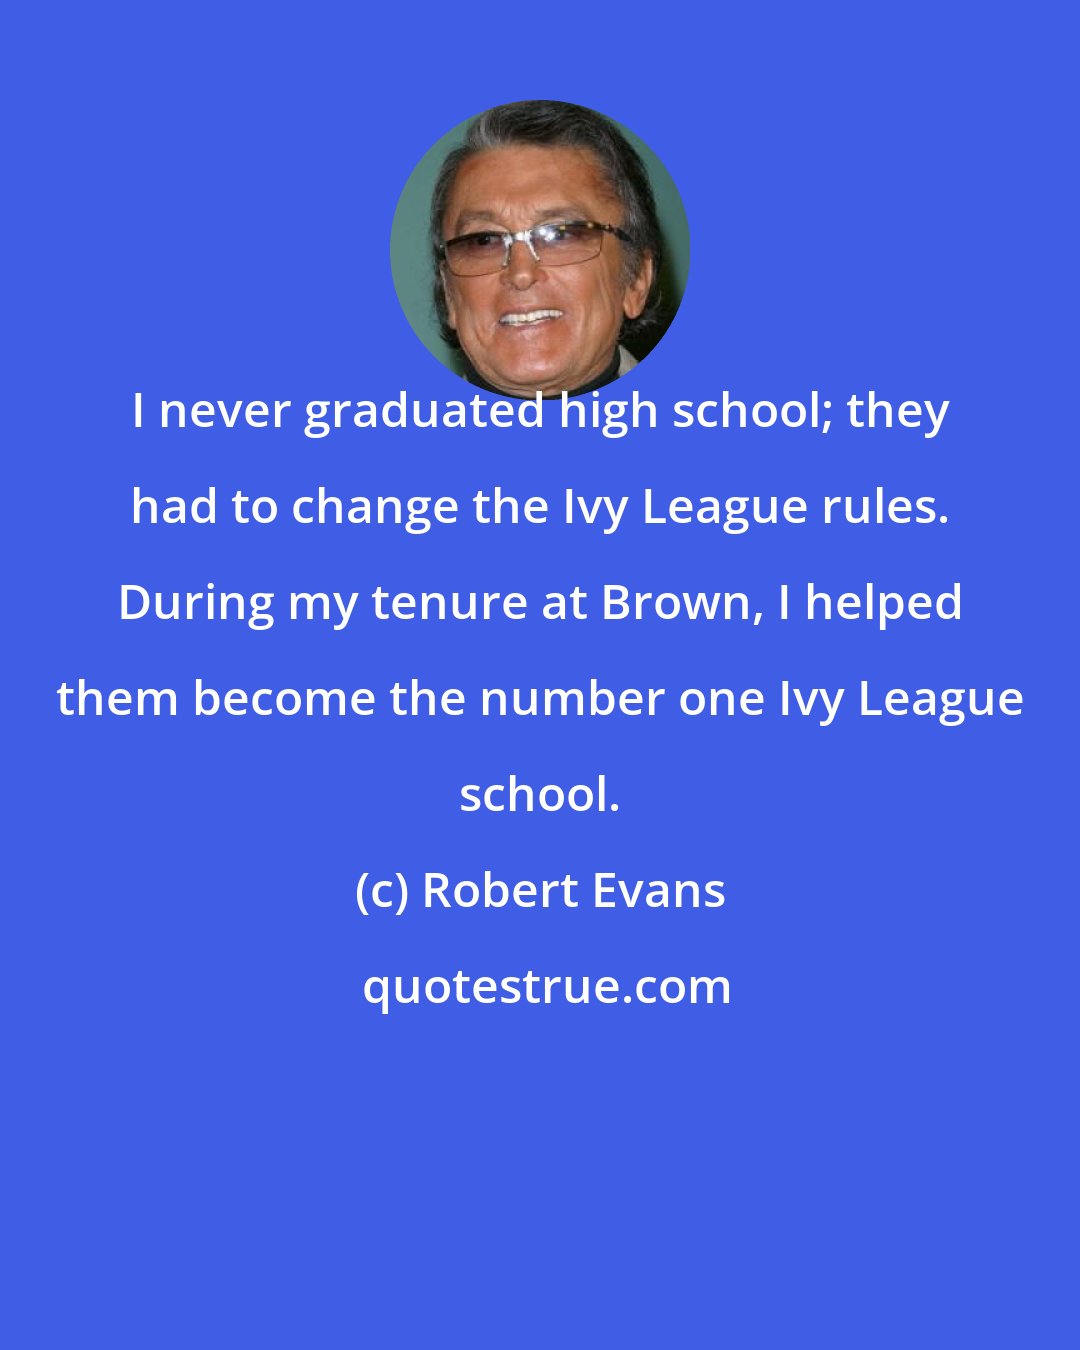 Robert Evans: I never graduated high school; they had to change the Ivy League rules. During my tenure at Brown, I helped them become the number one Ivy League school.